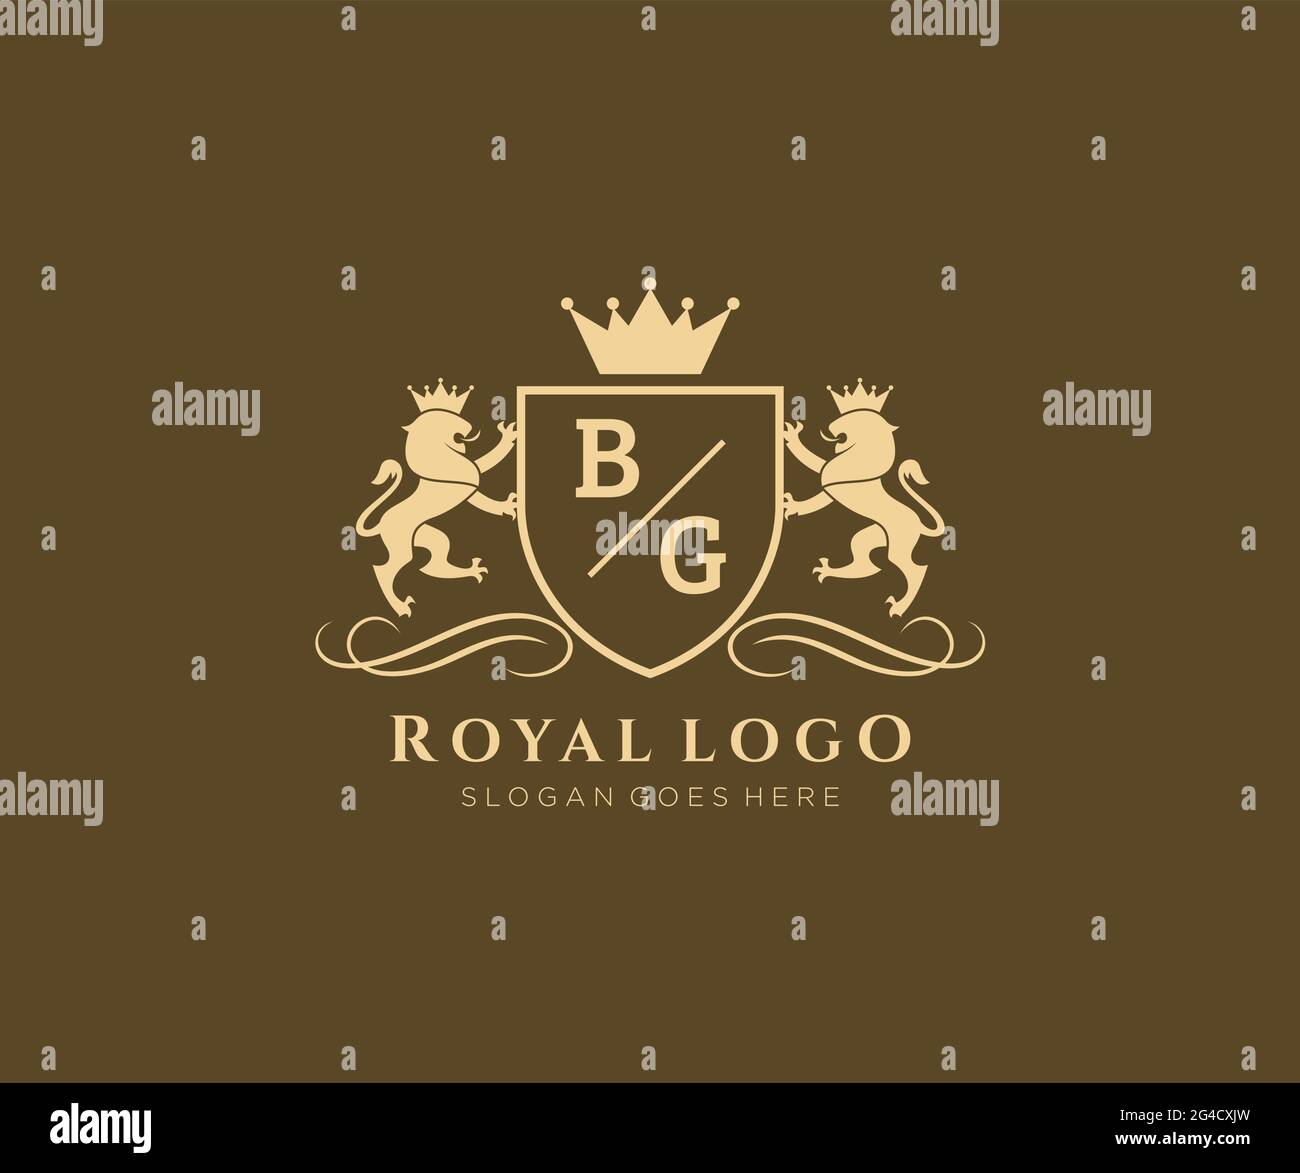 BG Letter Lion Royal Luxury Heraldic,Crest Logo template in vector art for Restaurant, Royalty, Boutique, Cafe, Hotel, Heraldic, Jewelry, Fashion and Stock Vector